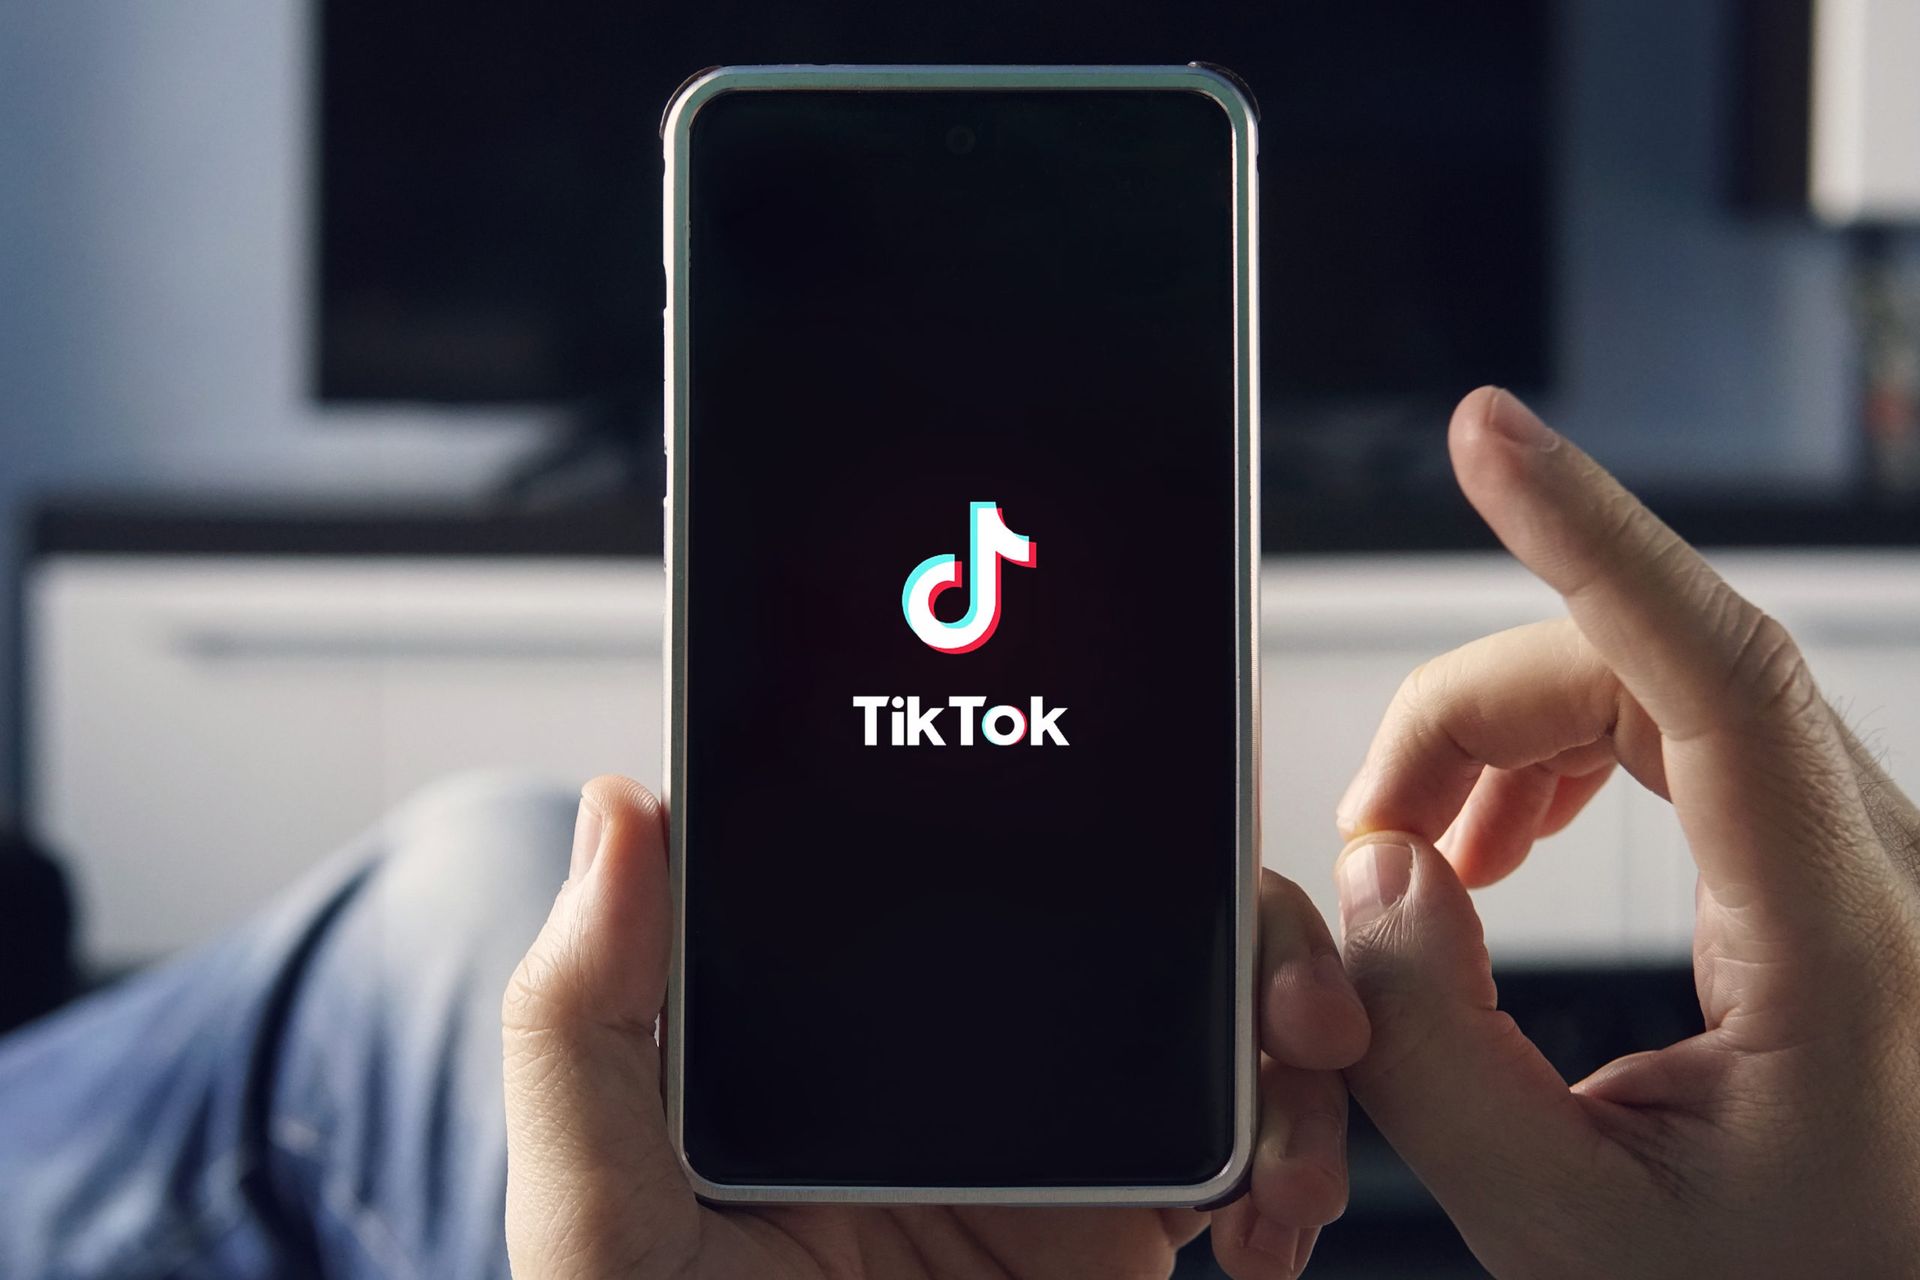 TikTok not sending messages: How to fix the DMs not working issue?